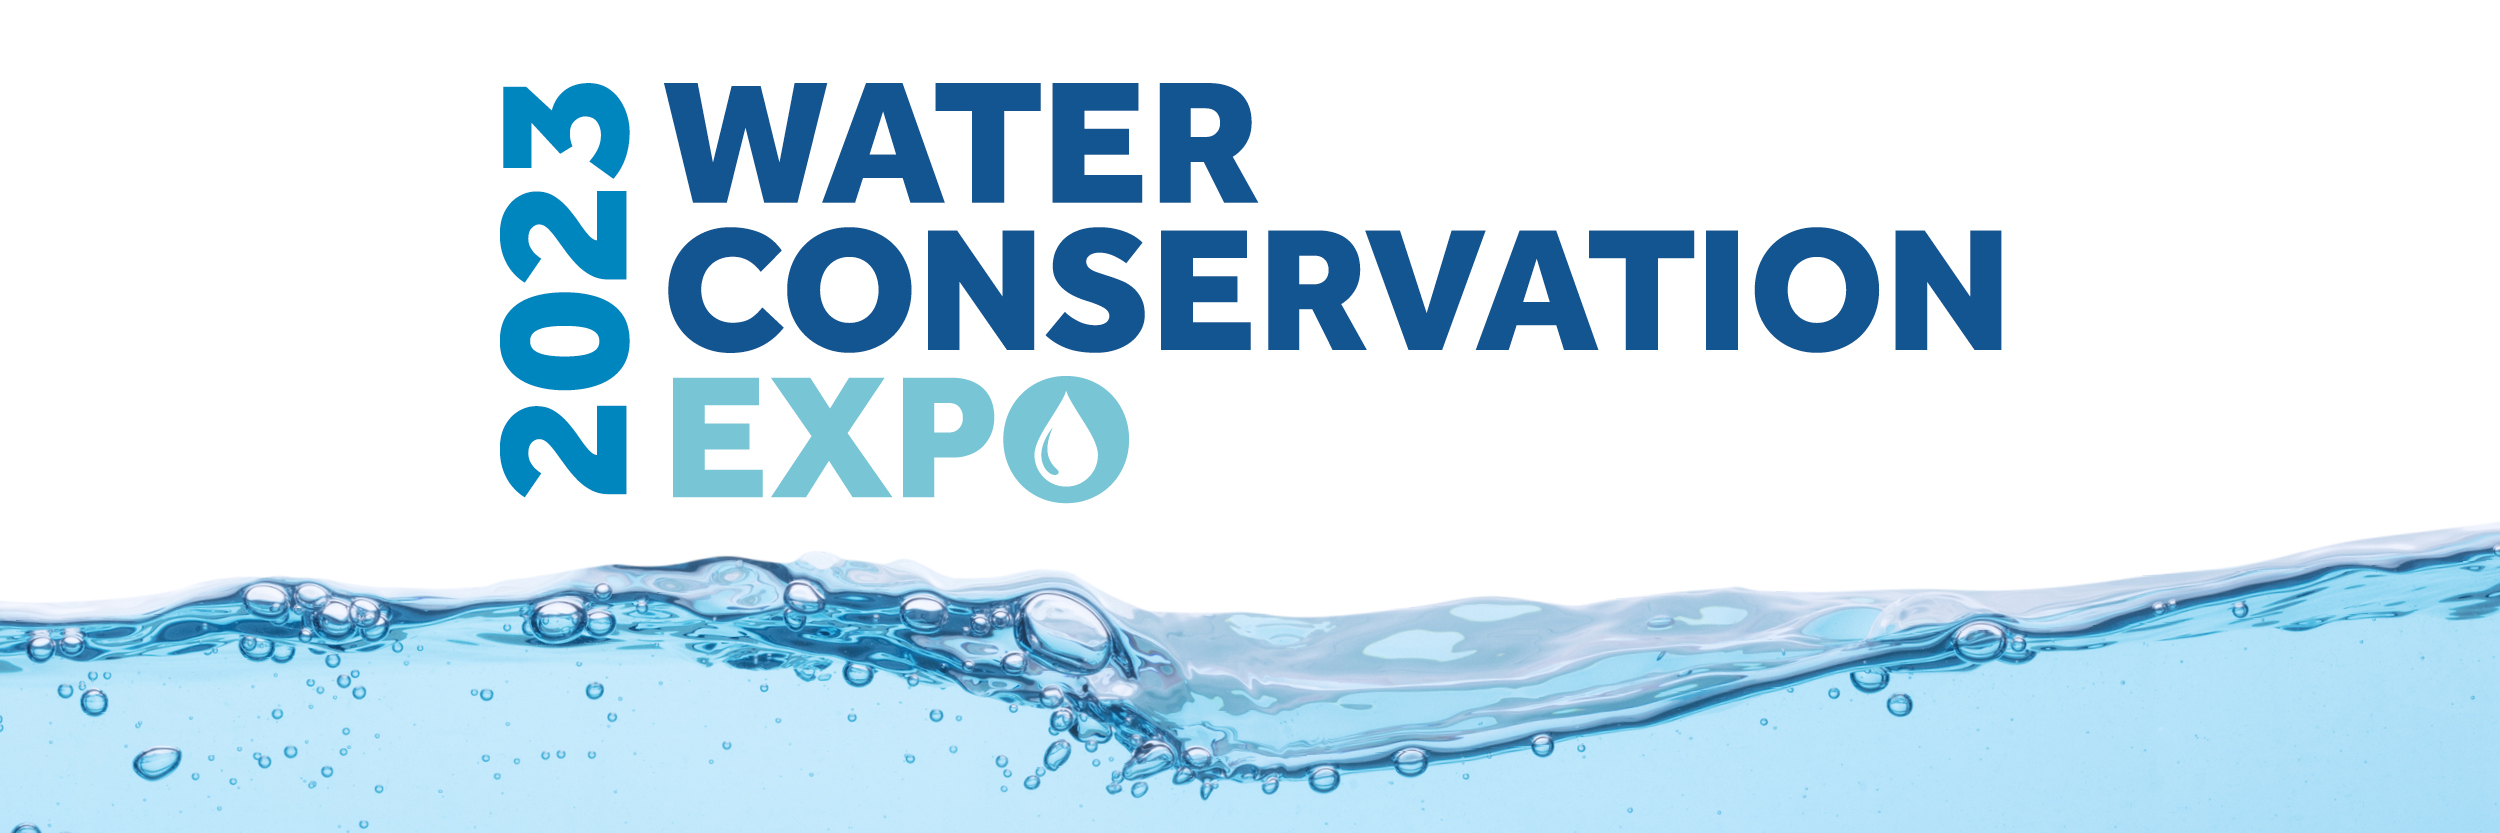 water-conservation-expo-srp